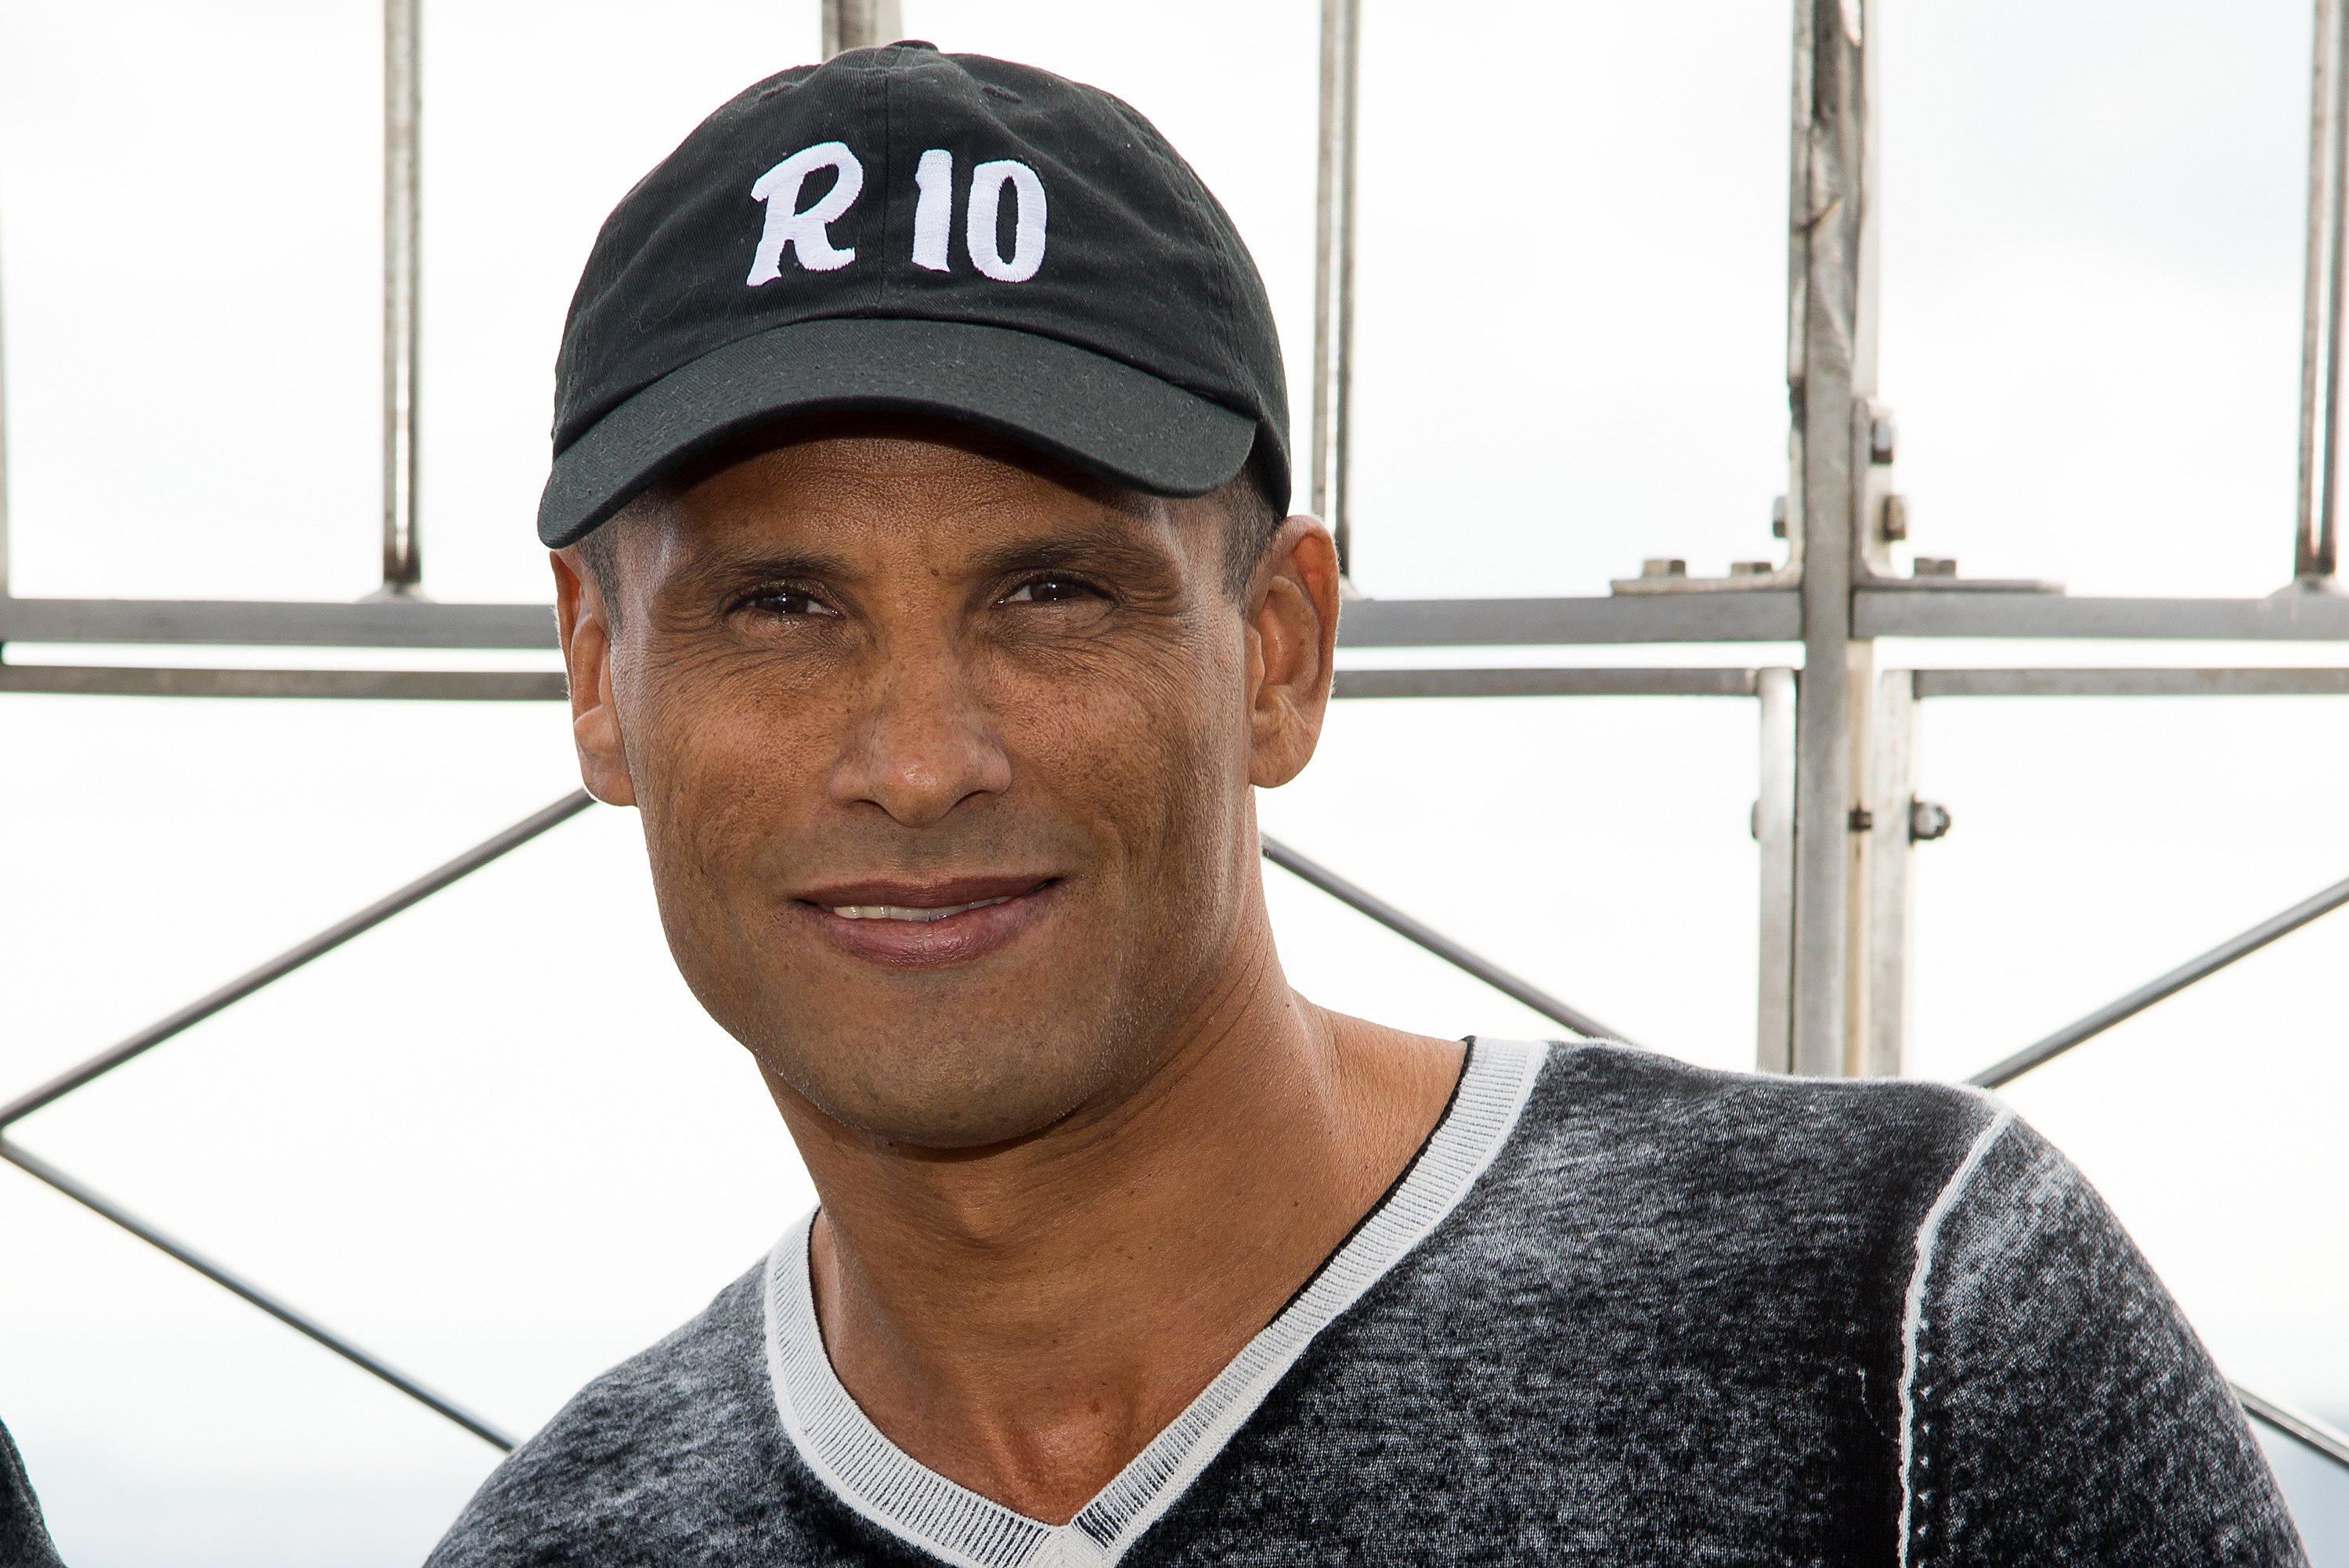 Soccer player Rivaldo visits The Empire State Building on March 17, 2015 in New York City. (Mike Pont&mdash;WireImage)